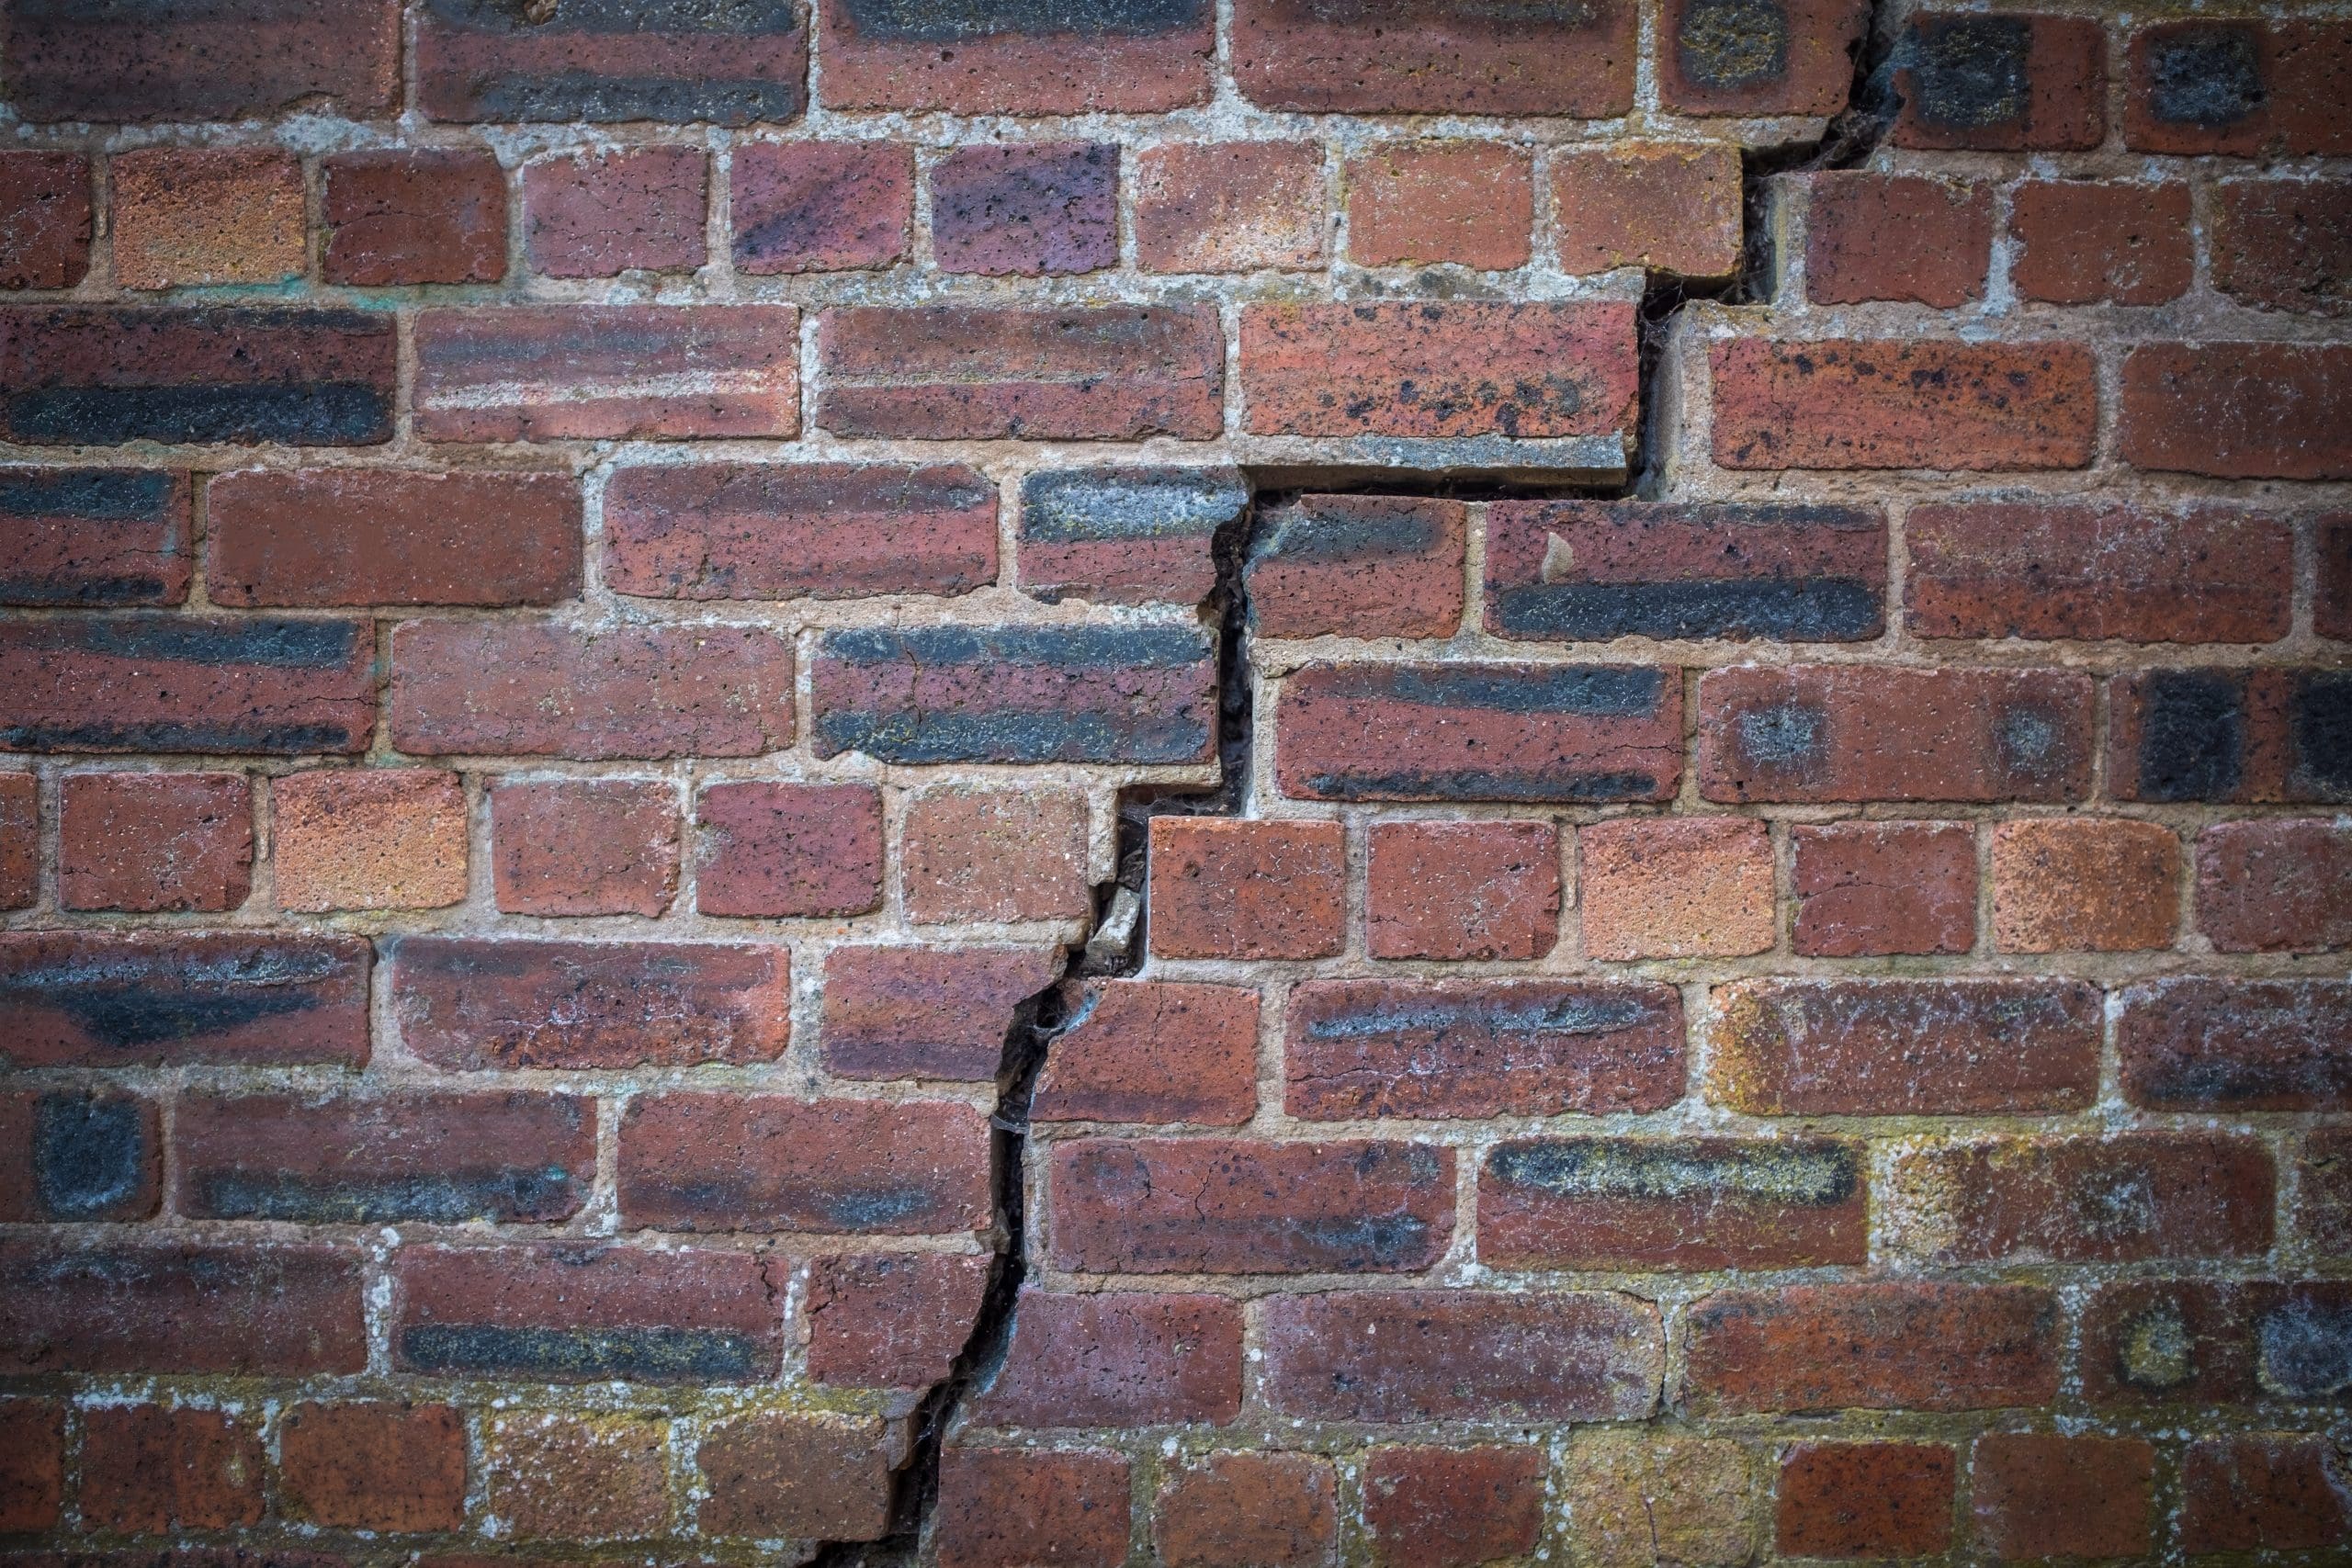 Should You Buy a House That Has Foundation Problems?